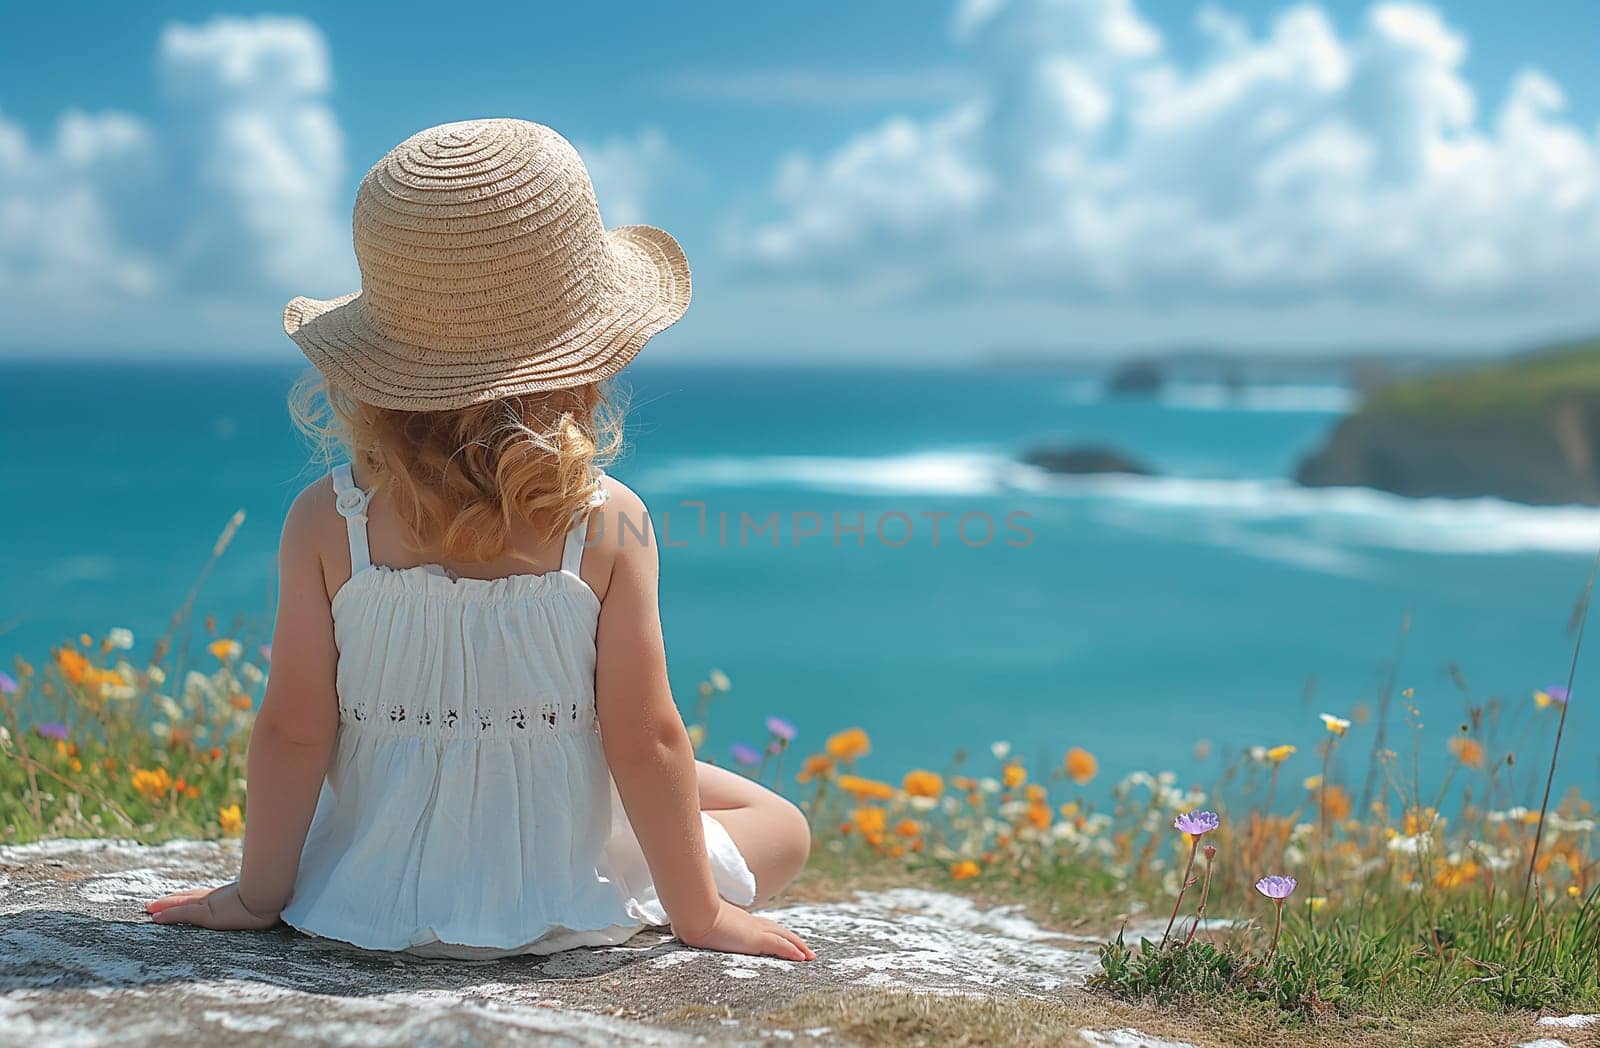 Child in sunhat enjoying a scenic coastal view by Hype2art